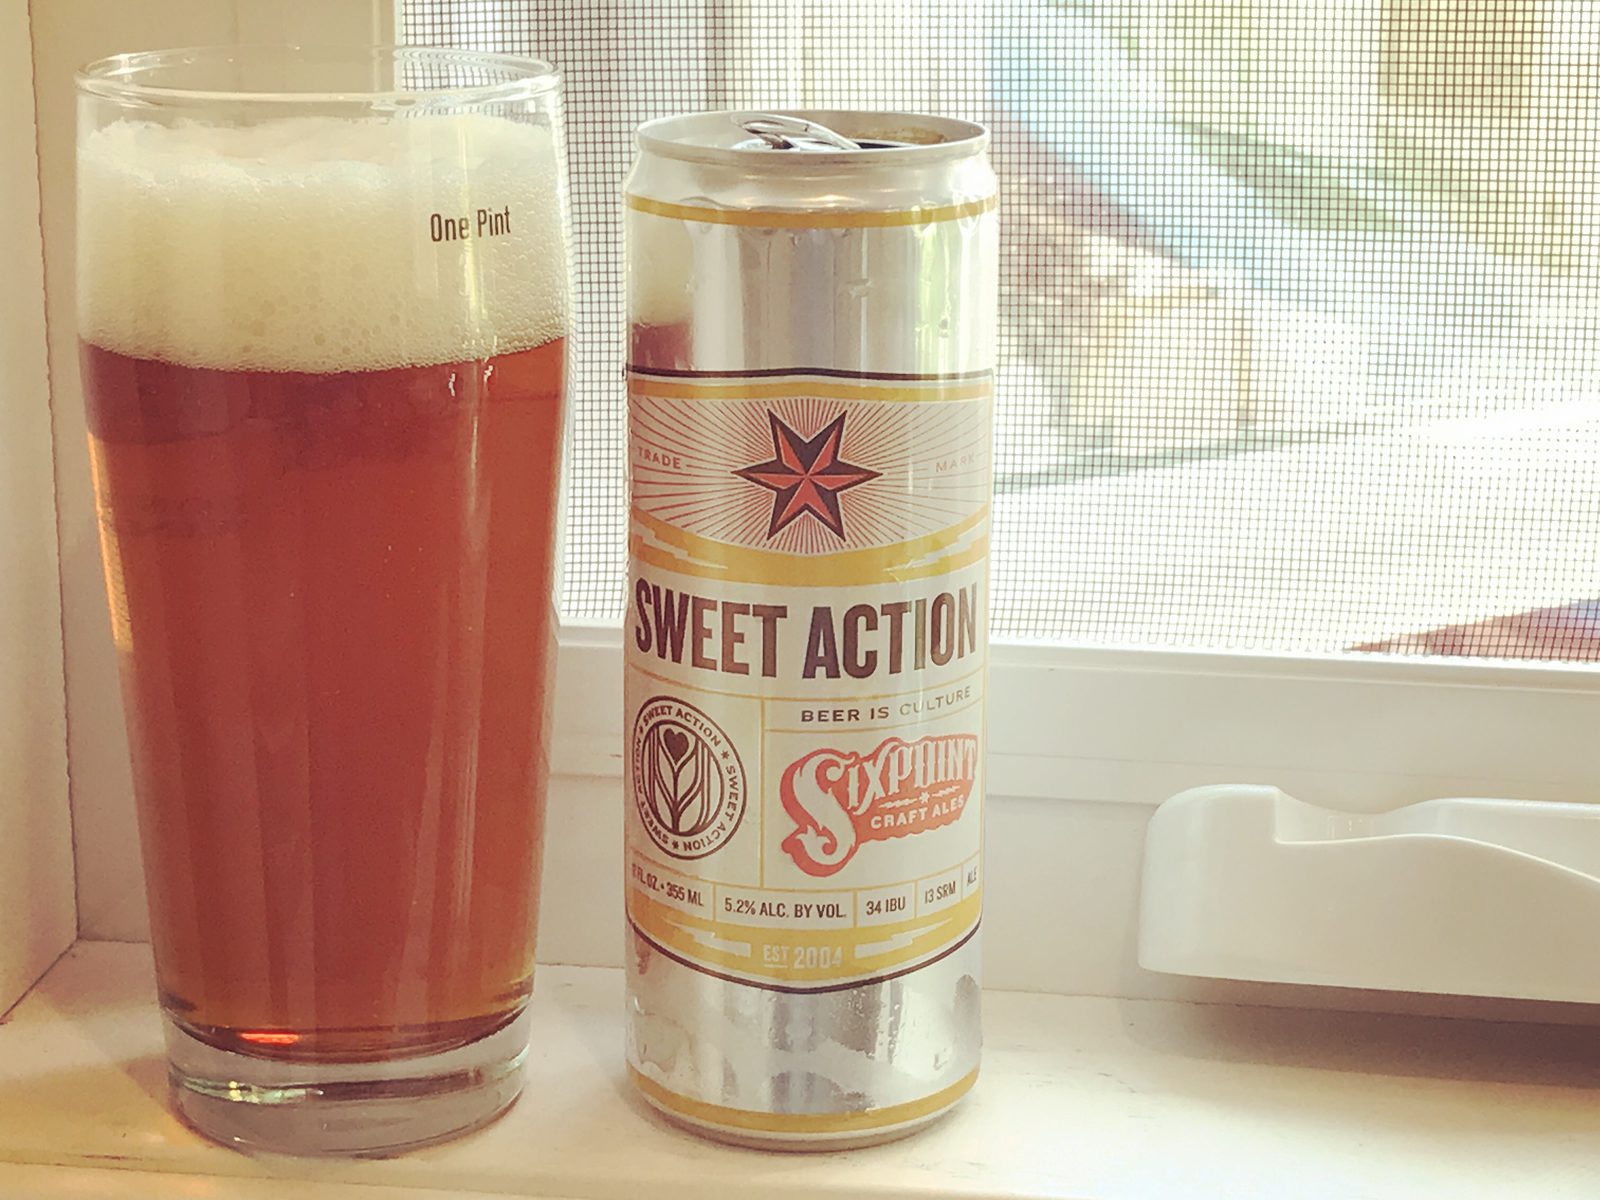 Sixpoint Brewery: Sweet Action